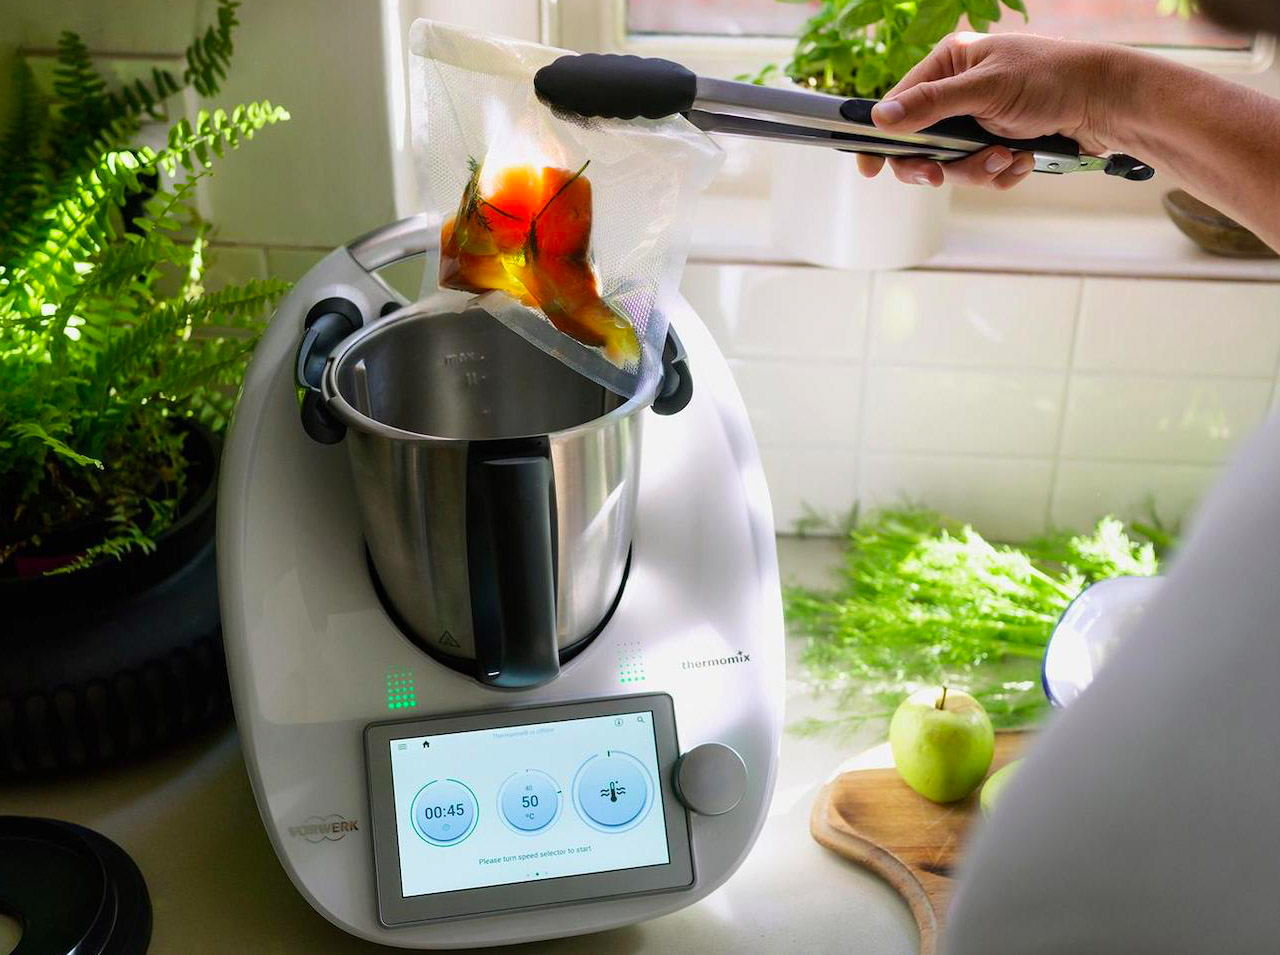 Genius Smart Kitchen Gadgets And Appliances To Cut Your Cooking Time Down -  NogenTech- a Tech Blog for Latest Updates & Business Ideas